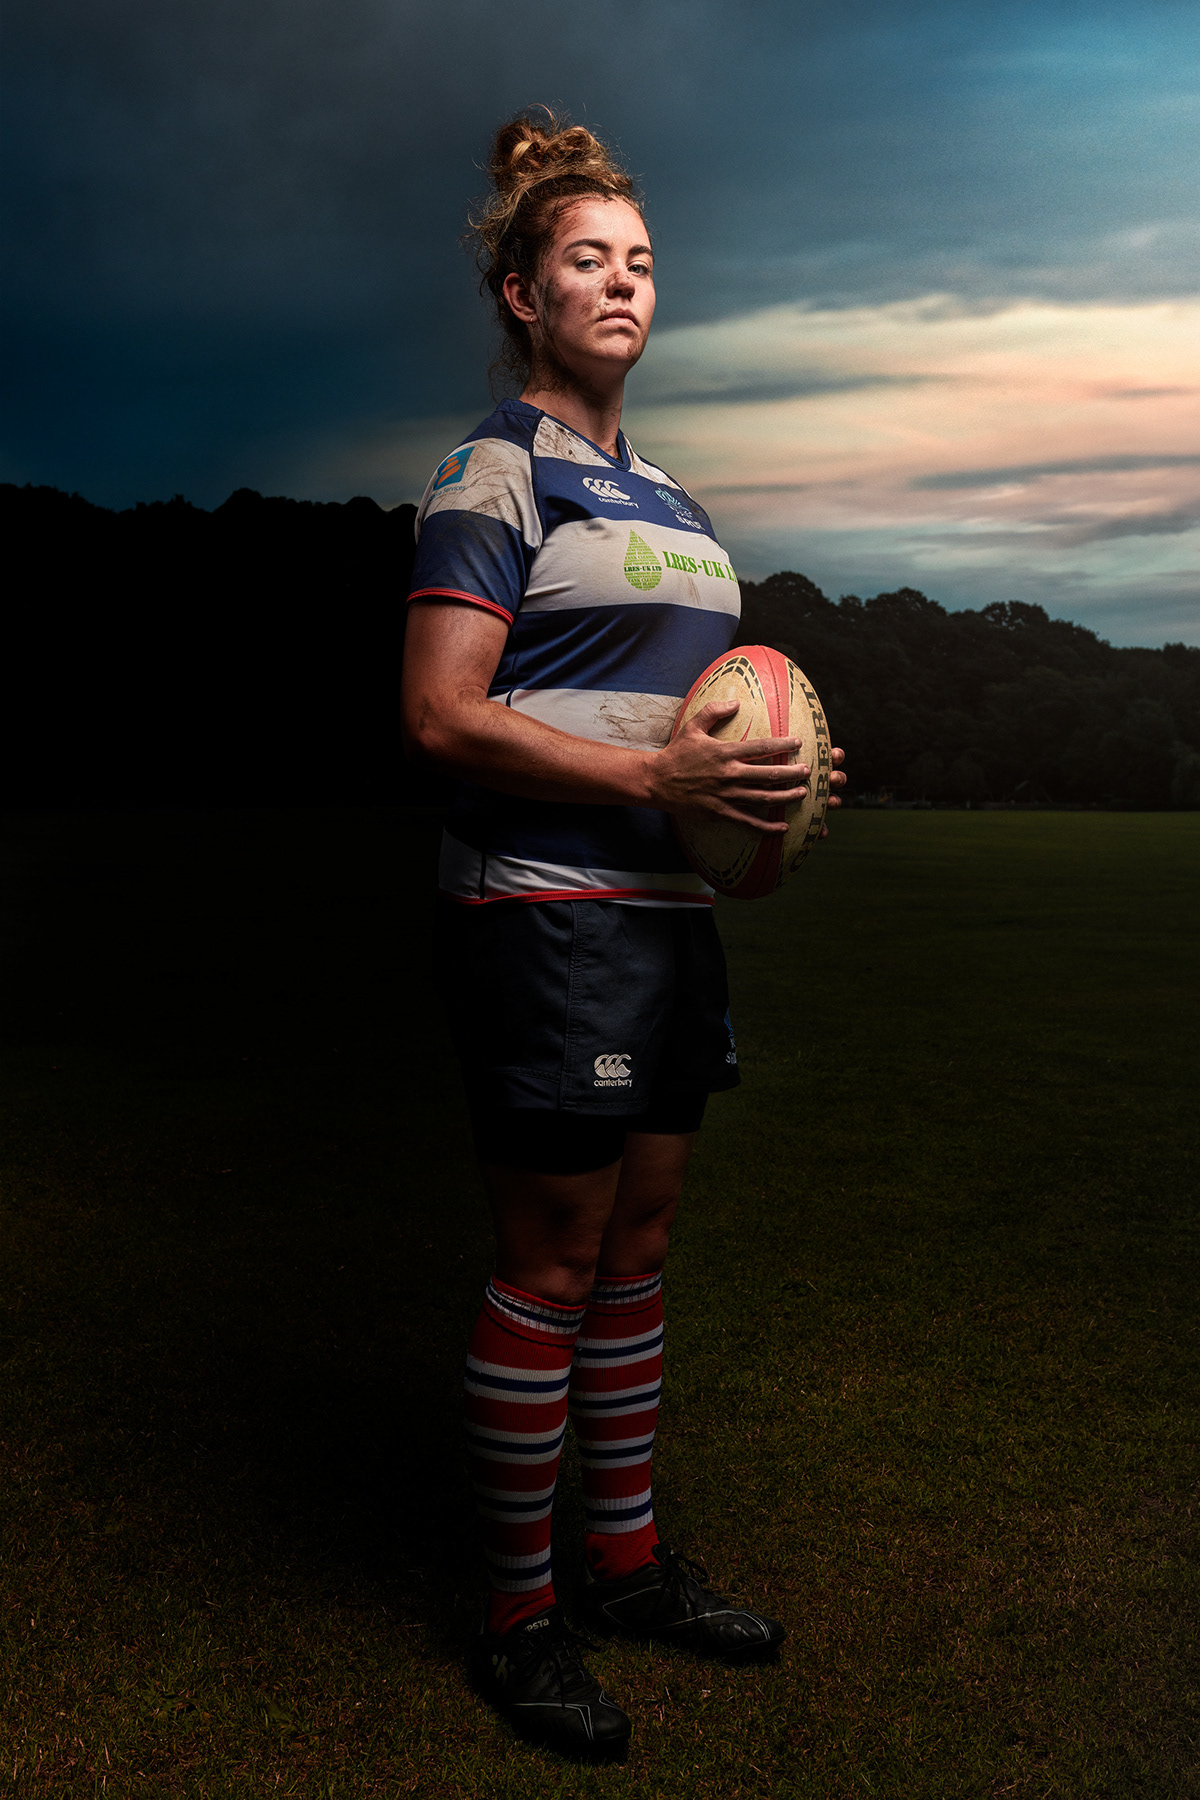 grade Rugby sport women retouch Photography  Editing 